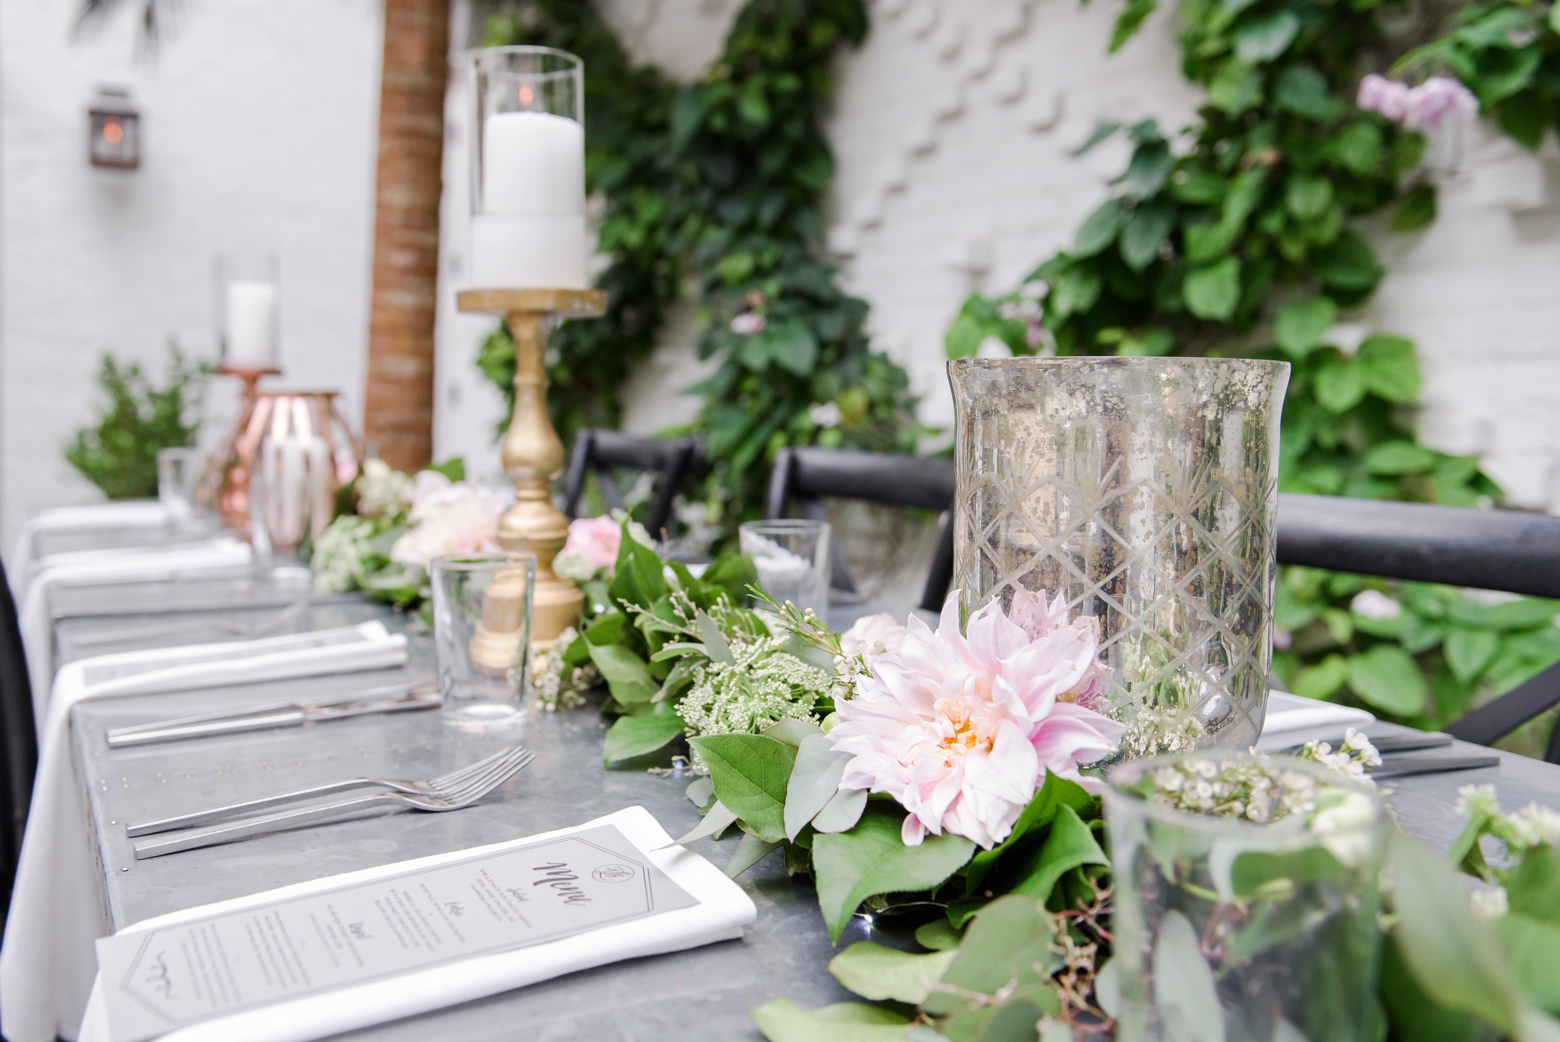 Table settings filled with florals and etched glass vases